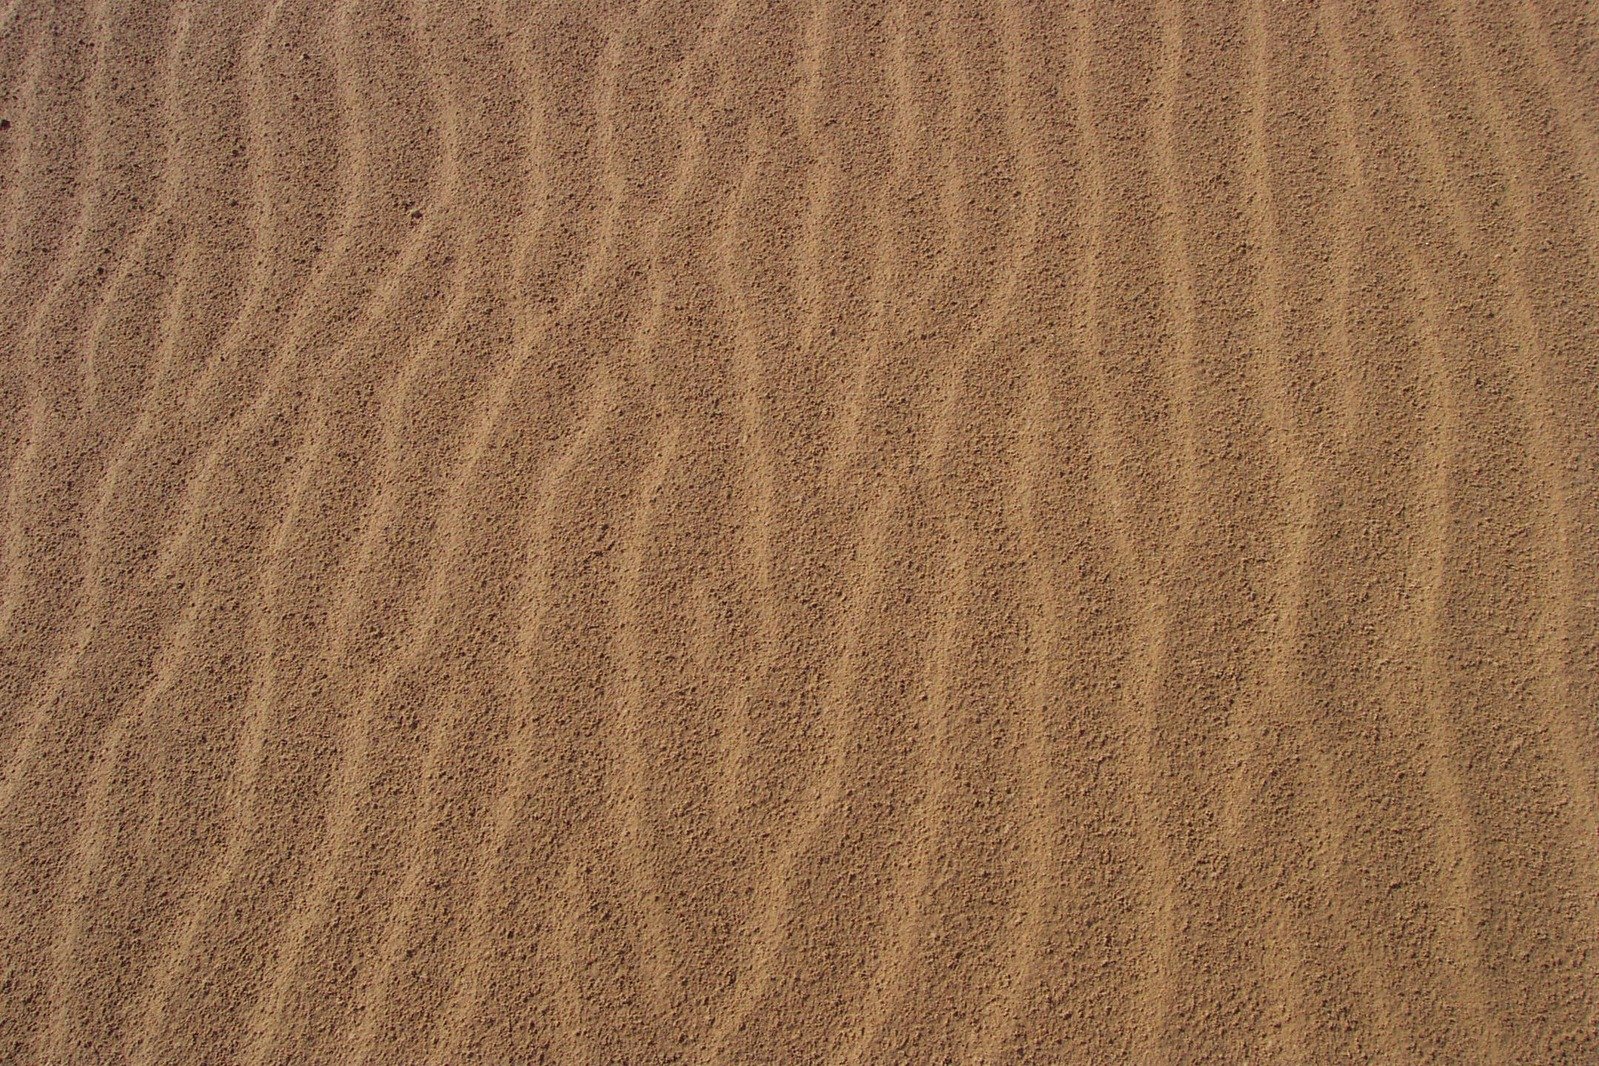 the bottom view of a sand dune has a very wavy line